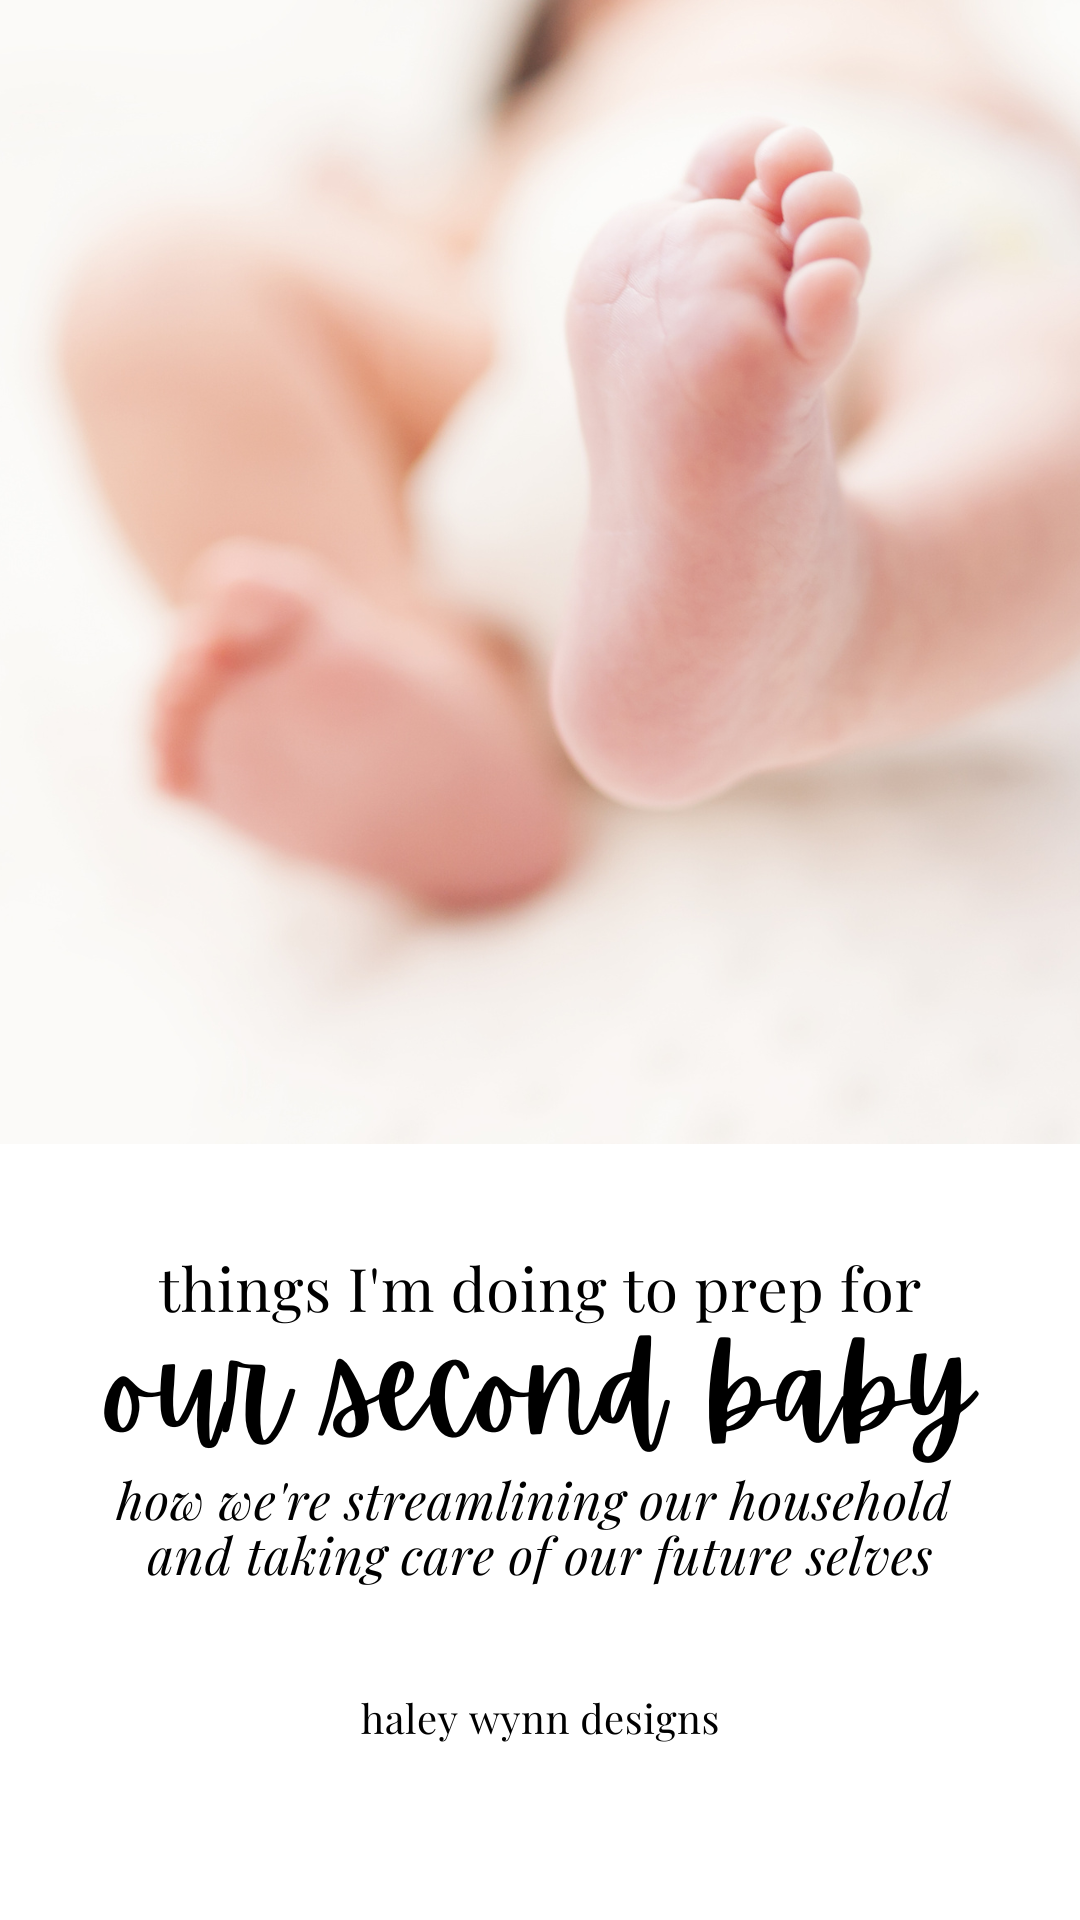 Things We'll Re-Do & Do New for Baby #2